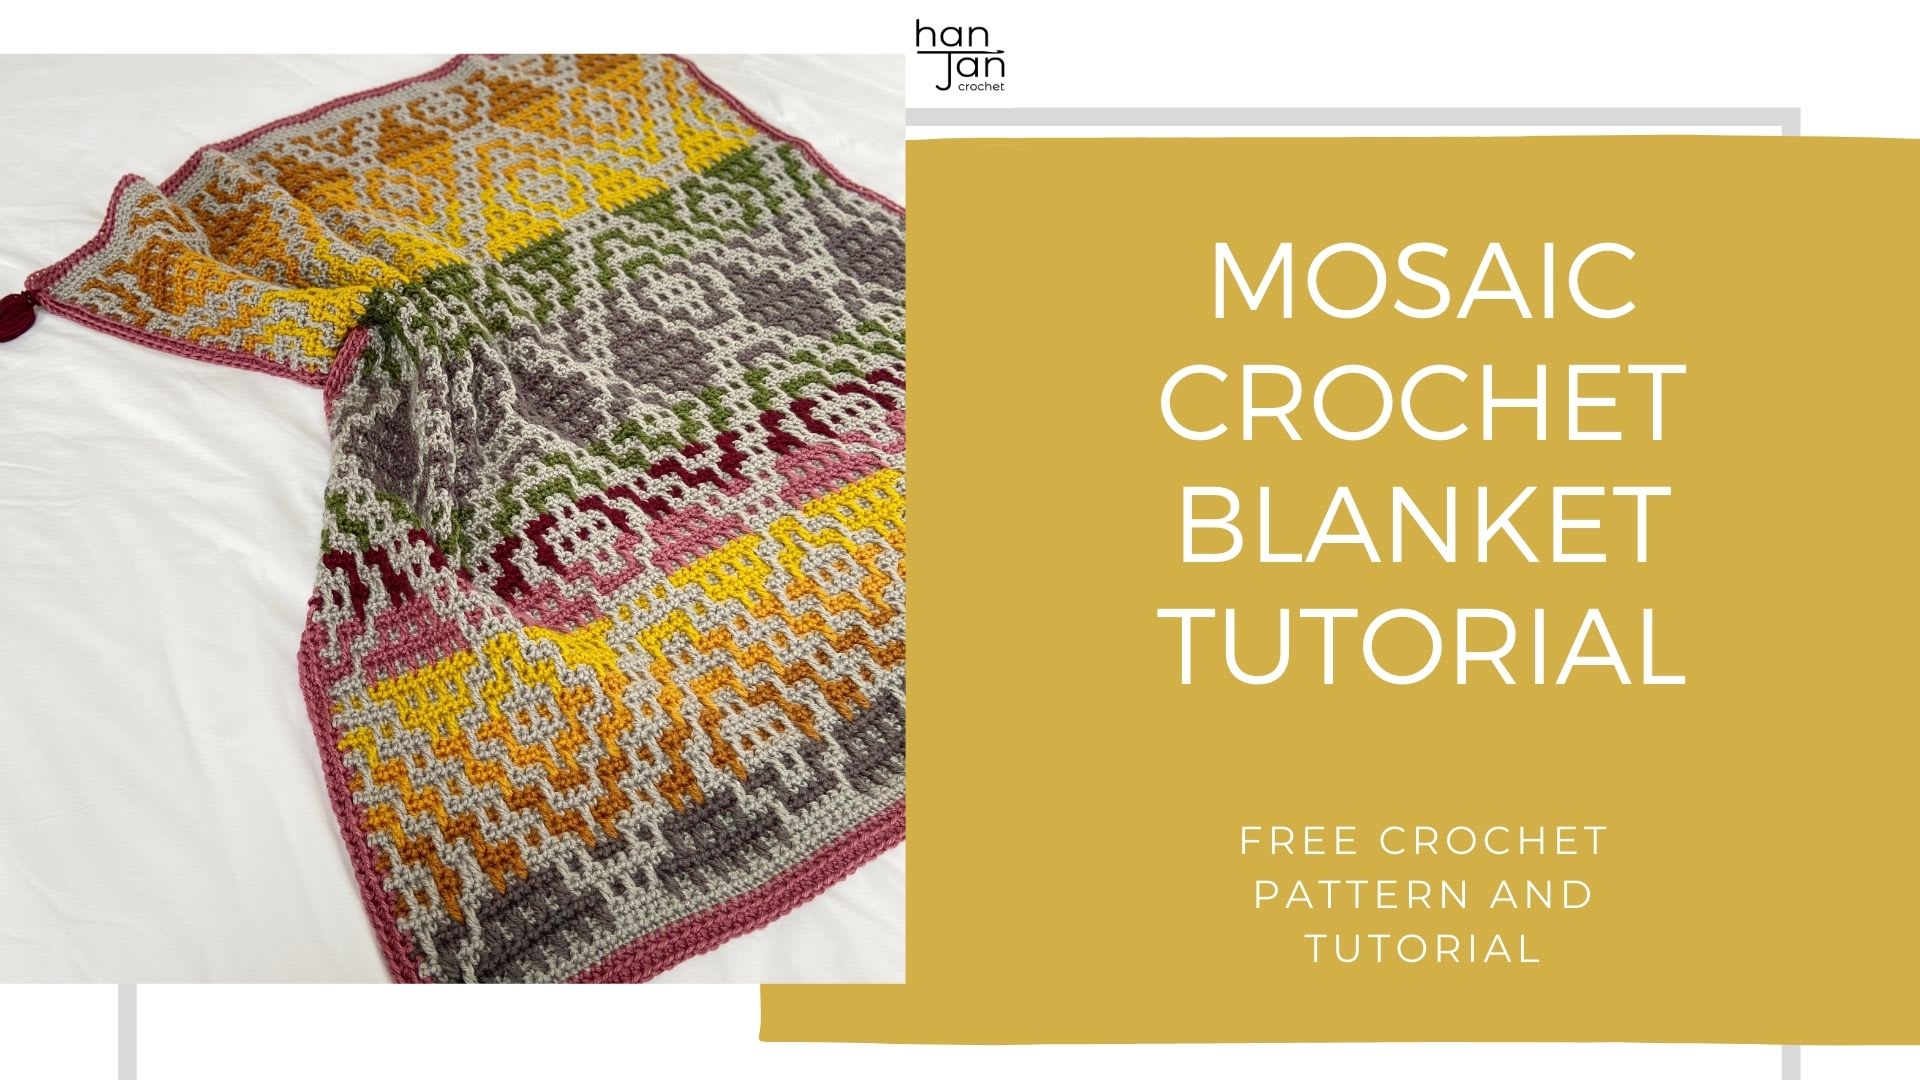 I'm attempting mosaic crochet for the first time after seeing this pattern  and falling in love with it. It's so simple after all! : r/crochet